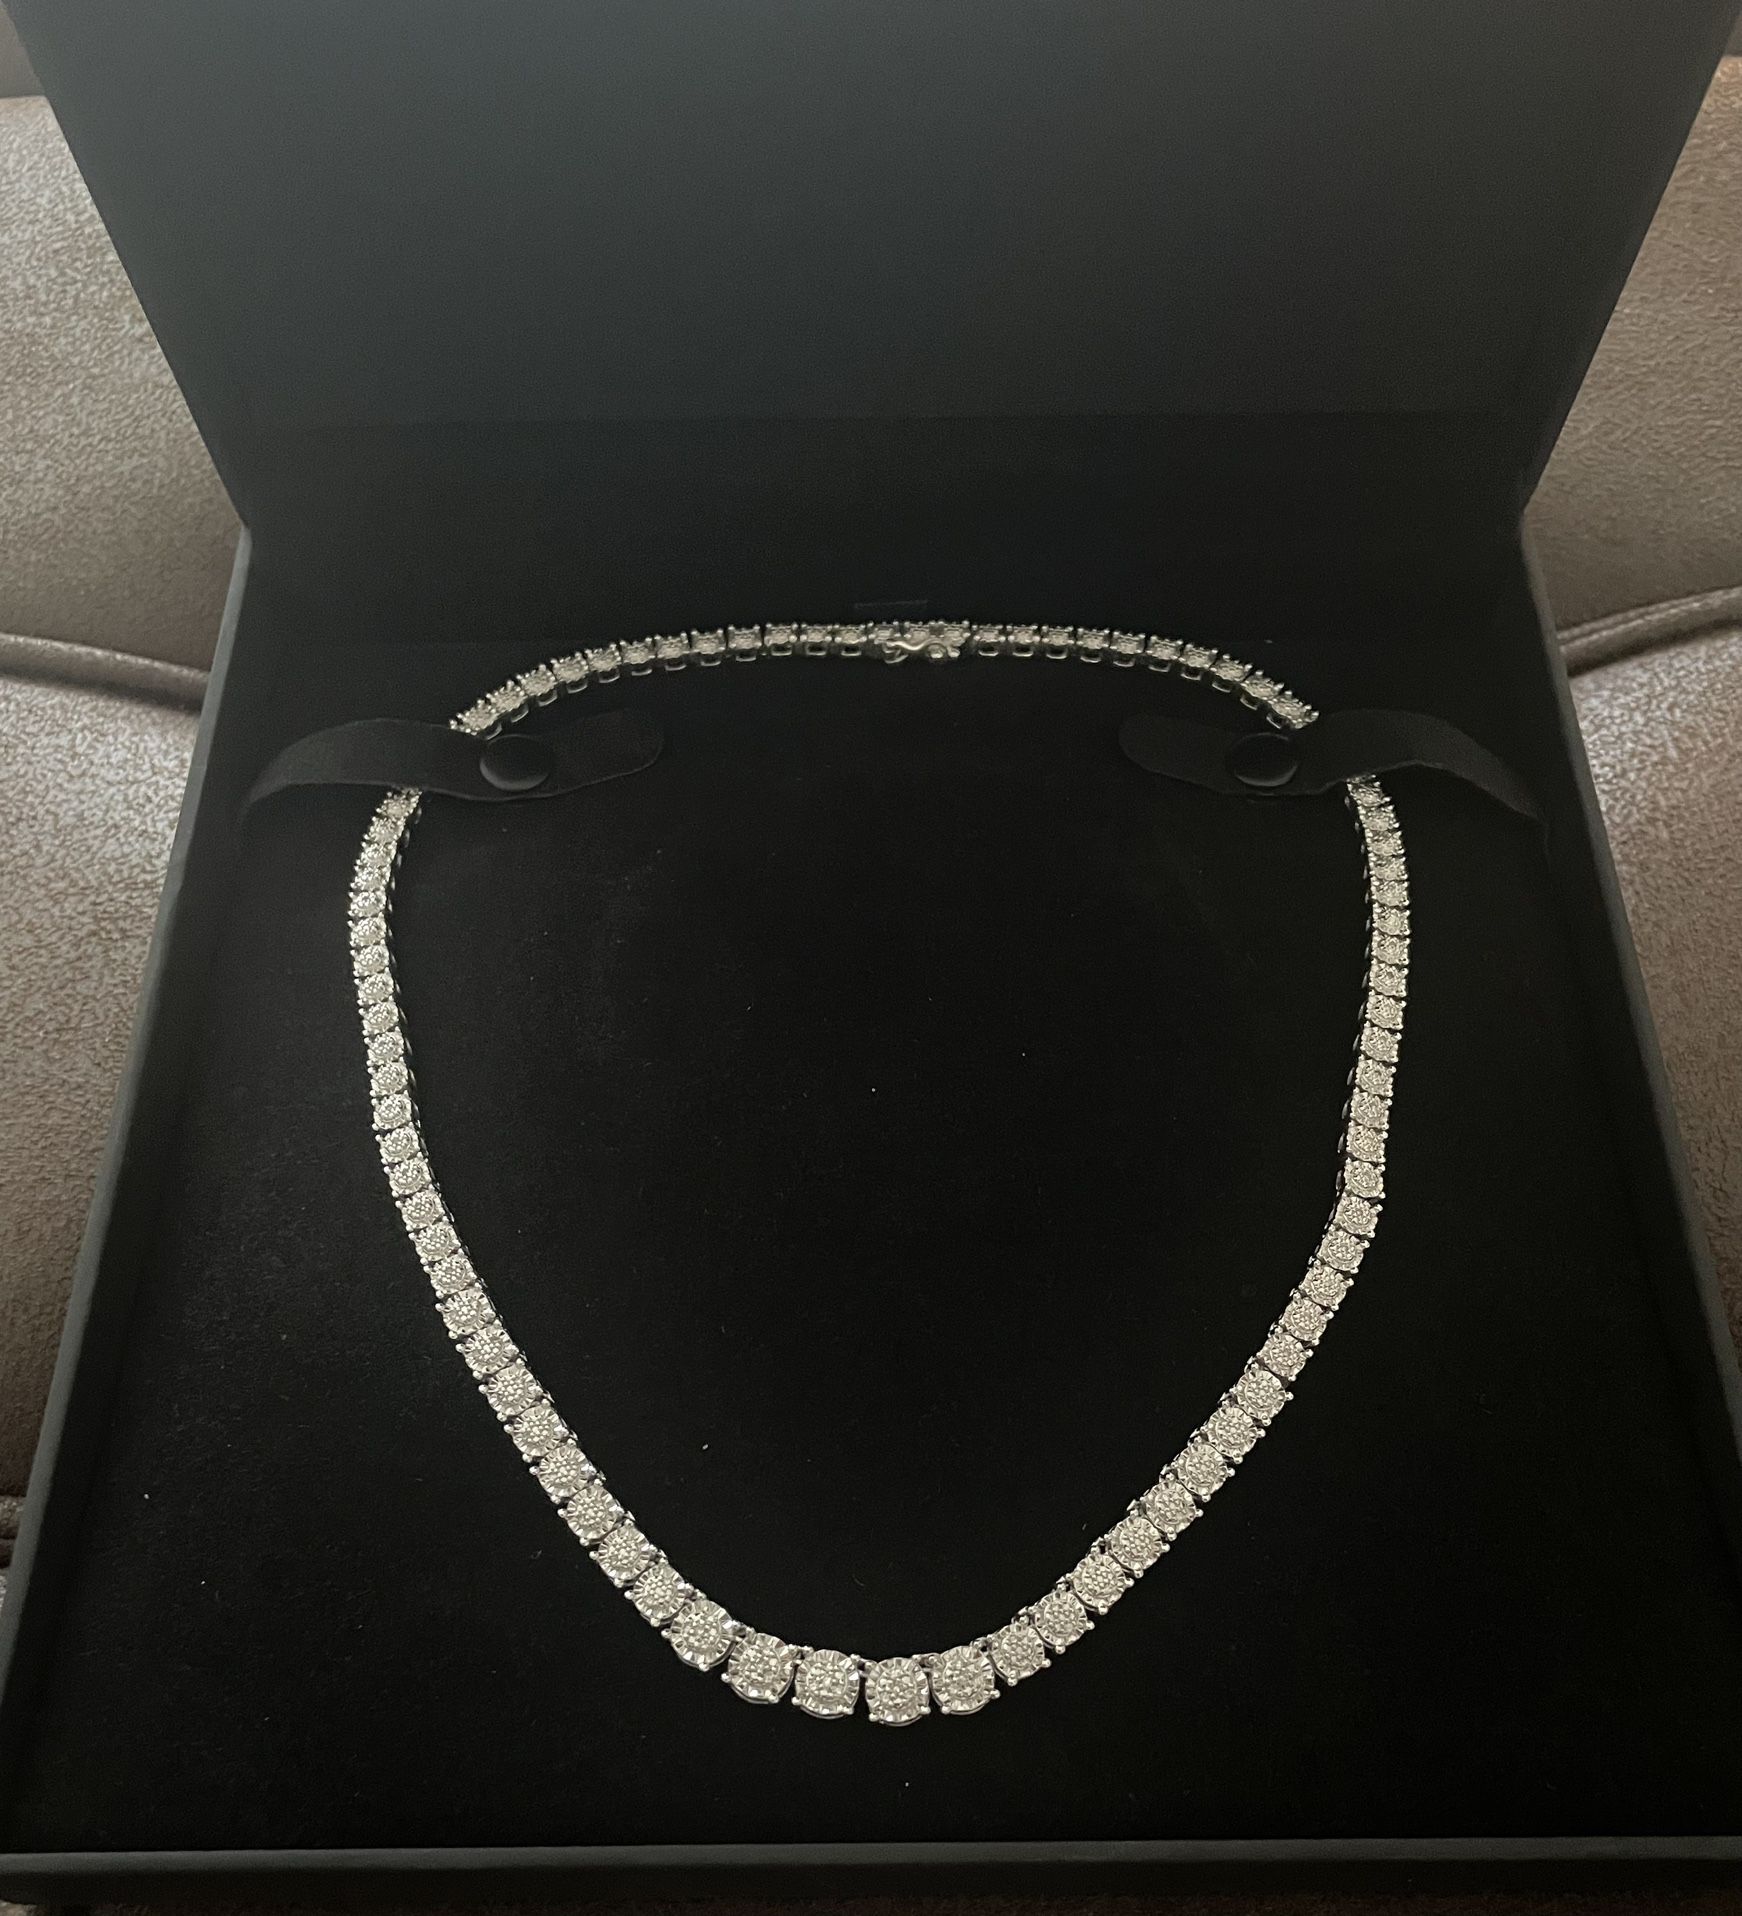 Diamond Tennis Necklace 1/2 ct tw Sterling Silver